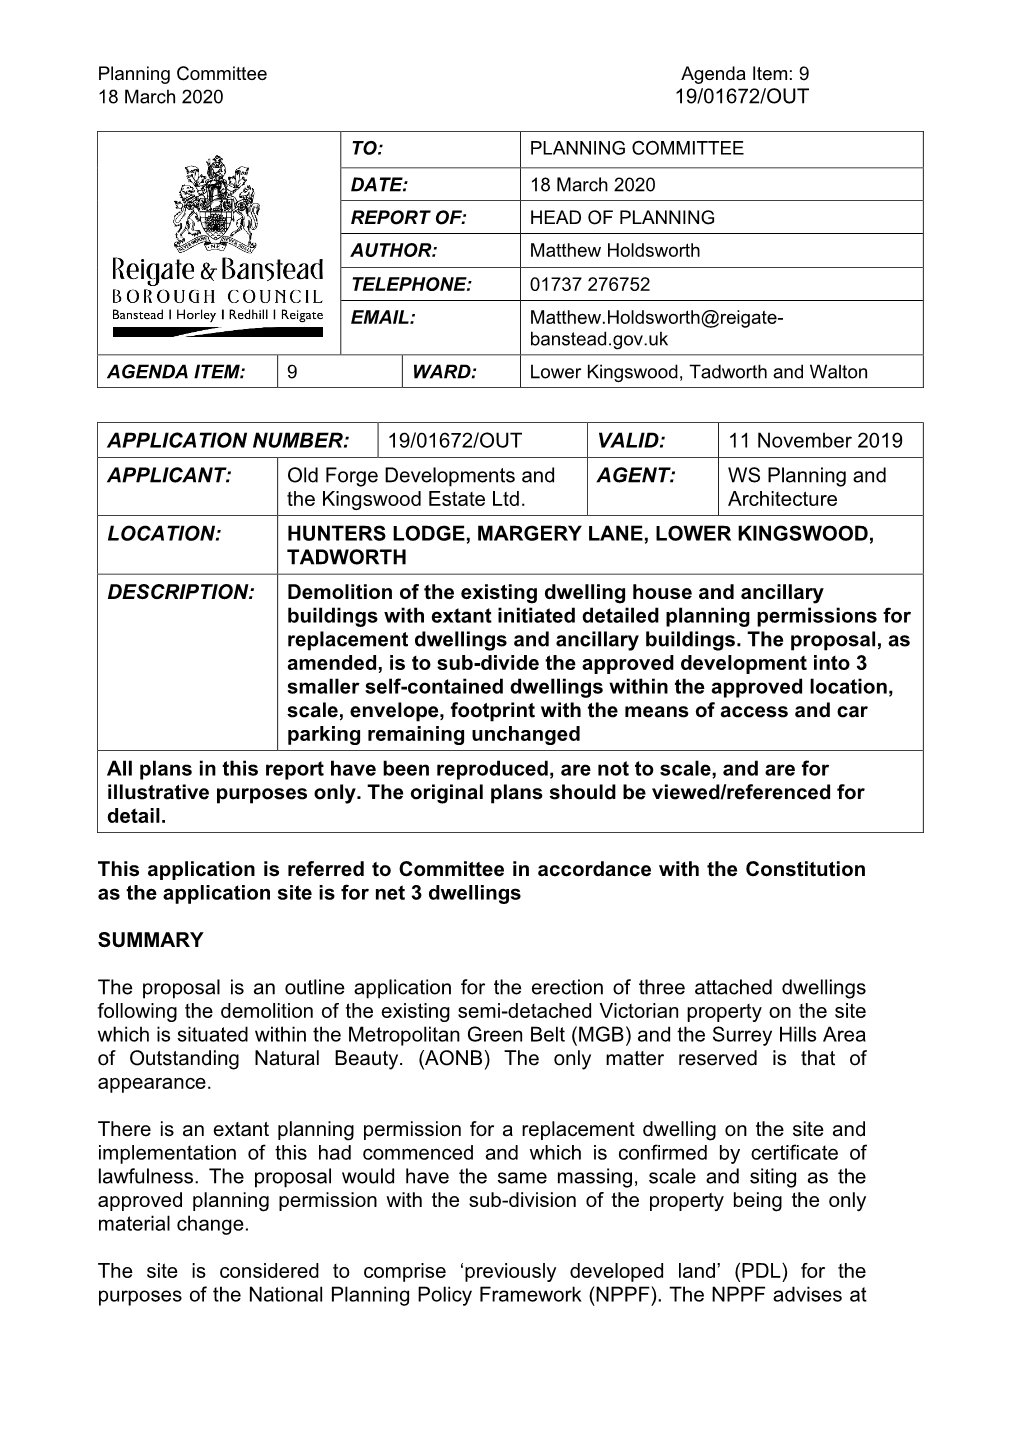 19/01672/OUT VALID: 11 November 2019 APPLICANT: Old Forge Developments and AGENT: WS Planning and the Kingswood Estate Ltd